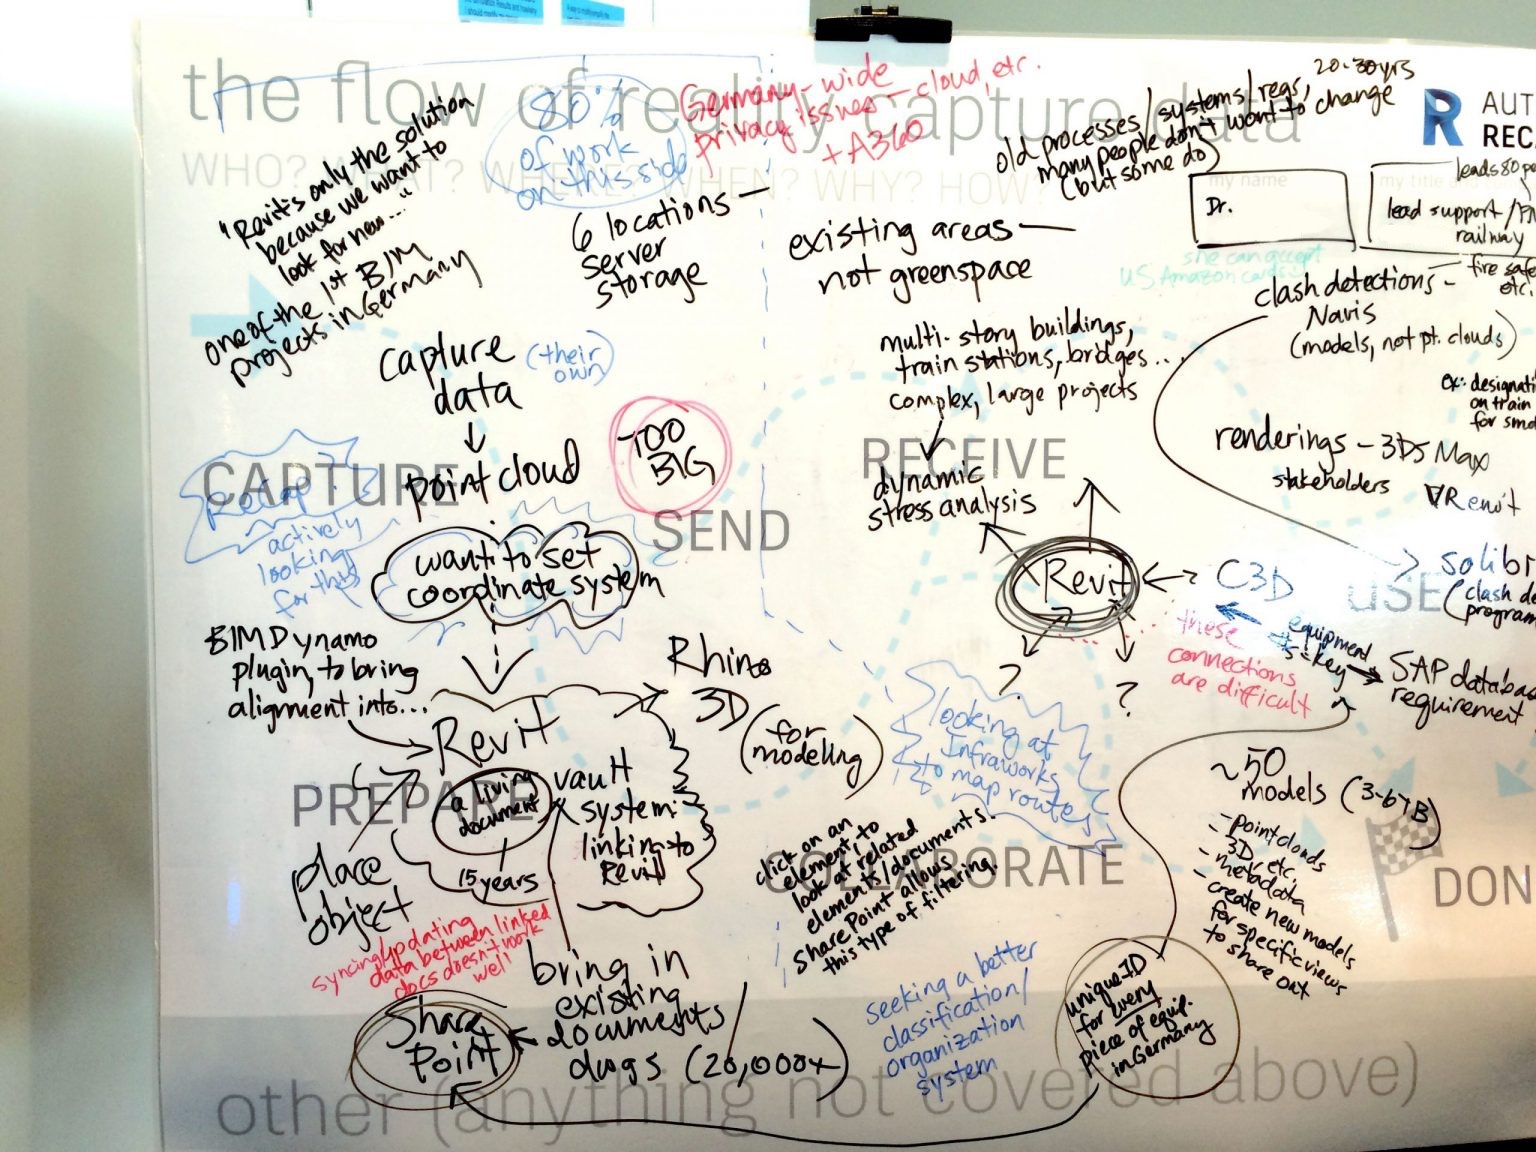 A photo of the whiteboard completely covered in whiteboard notes in 3 different colors, including arrows and bubbles.